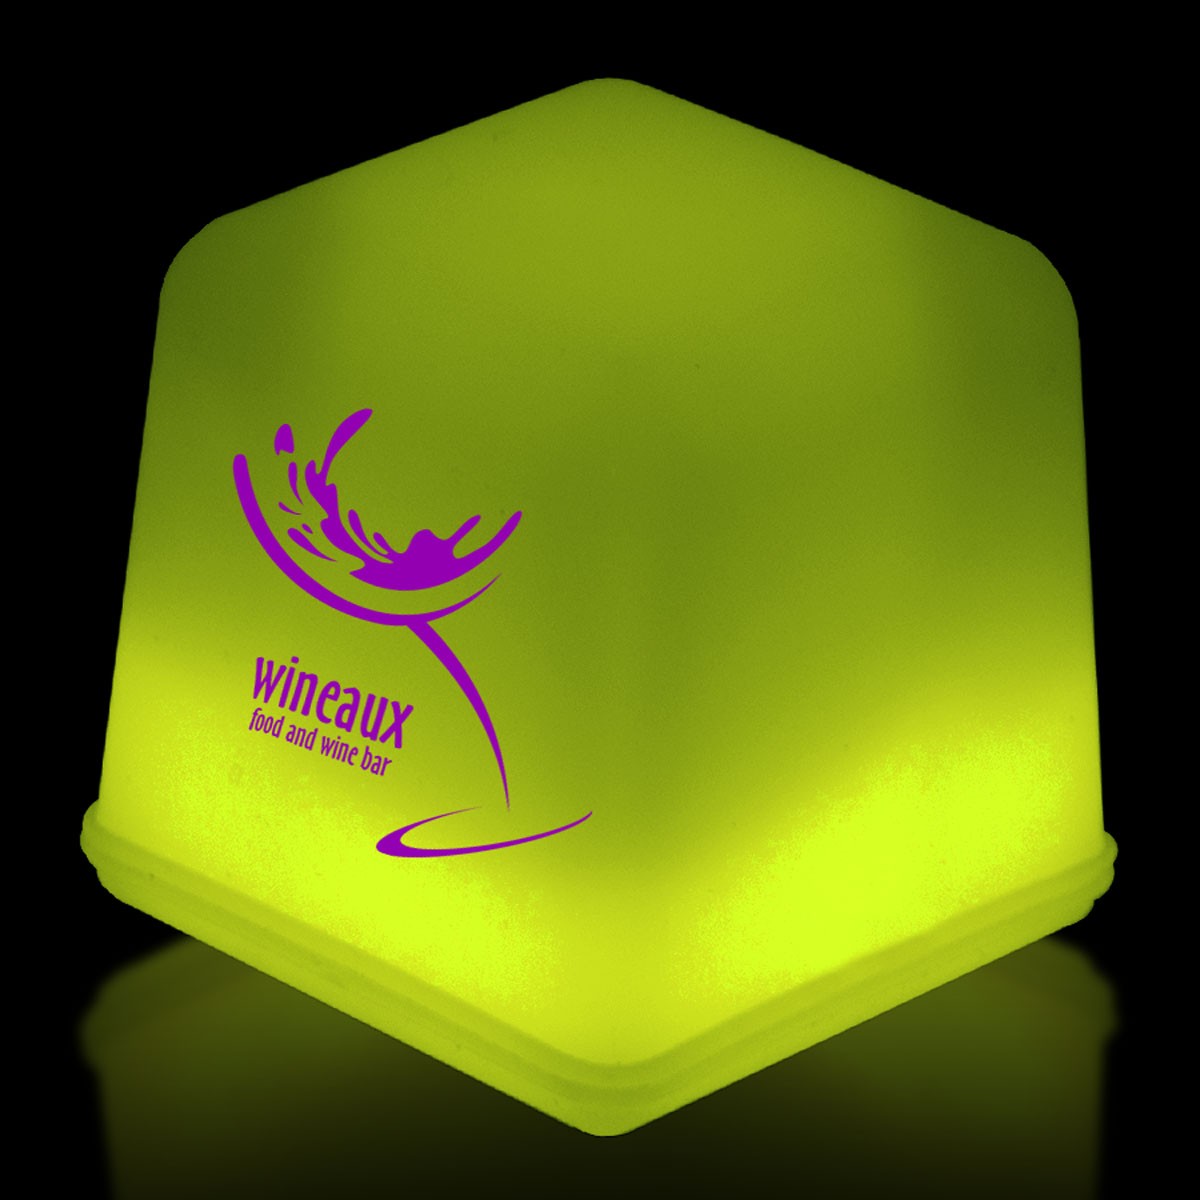 1" Yellow Glowing Ice Cubes 